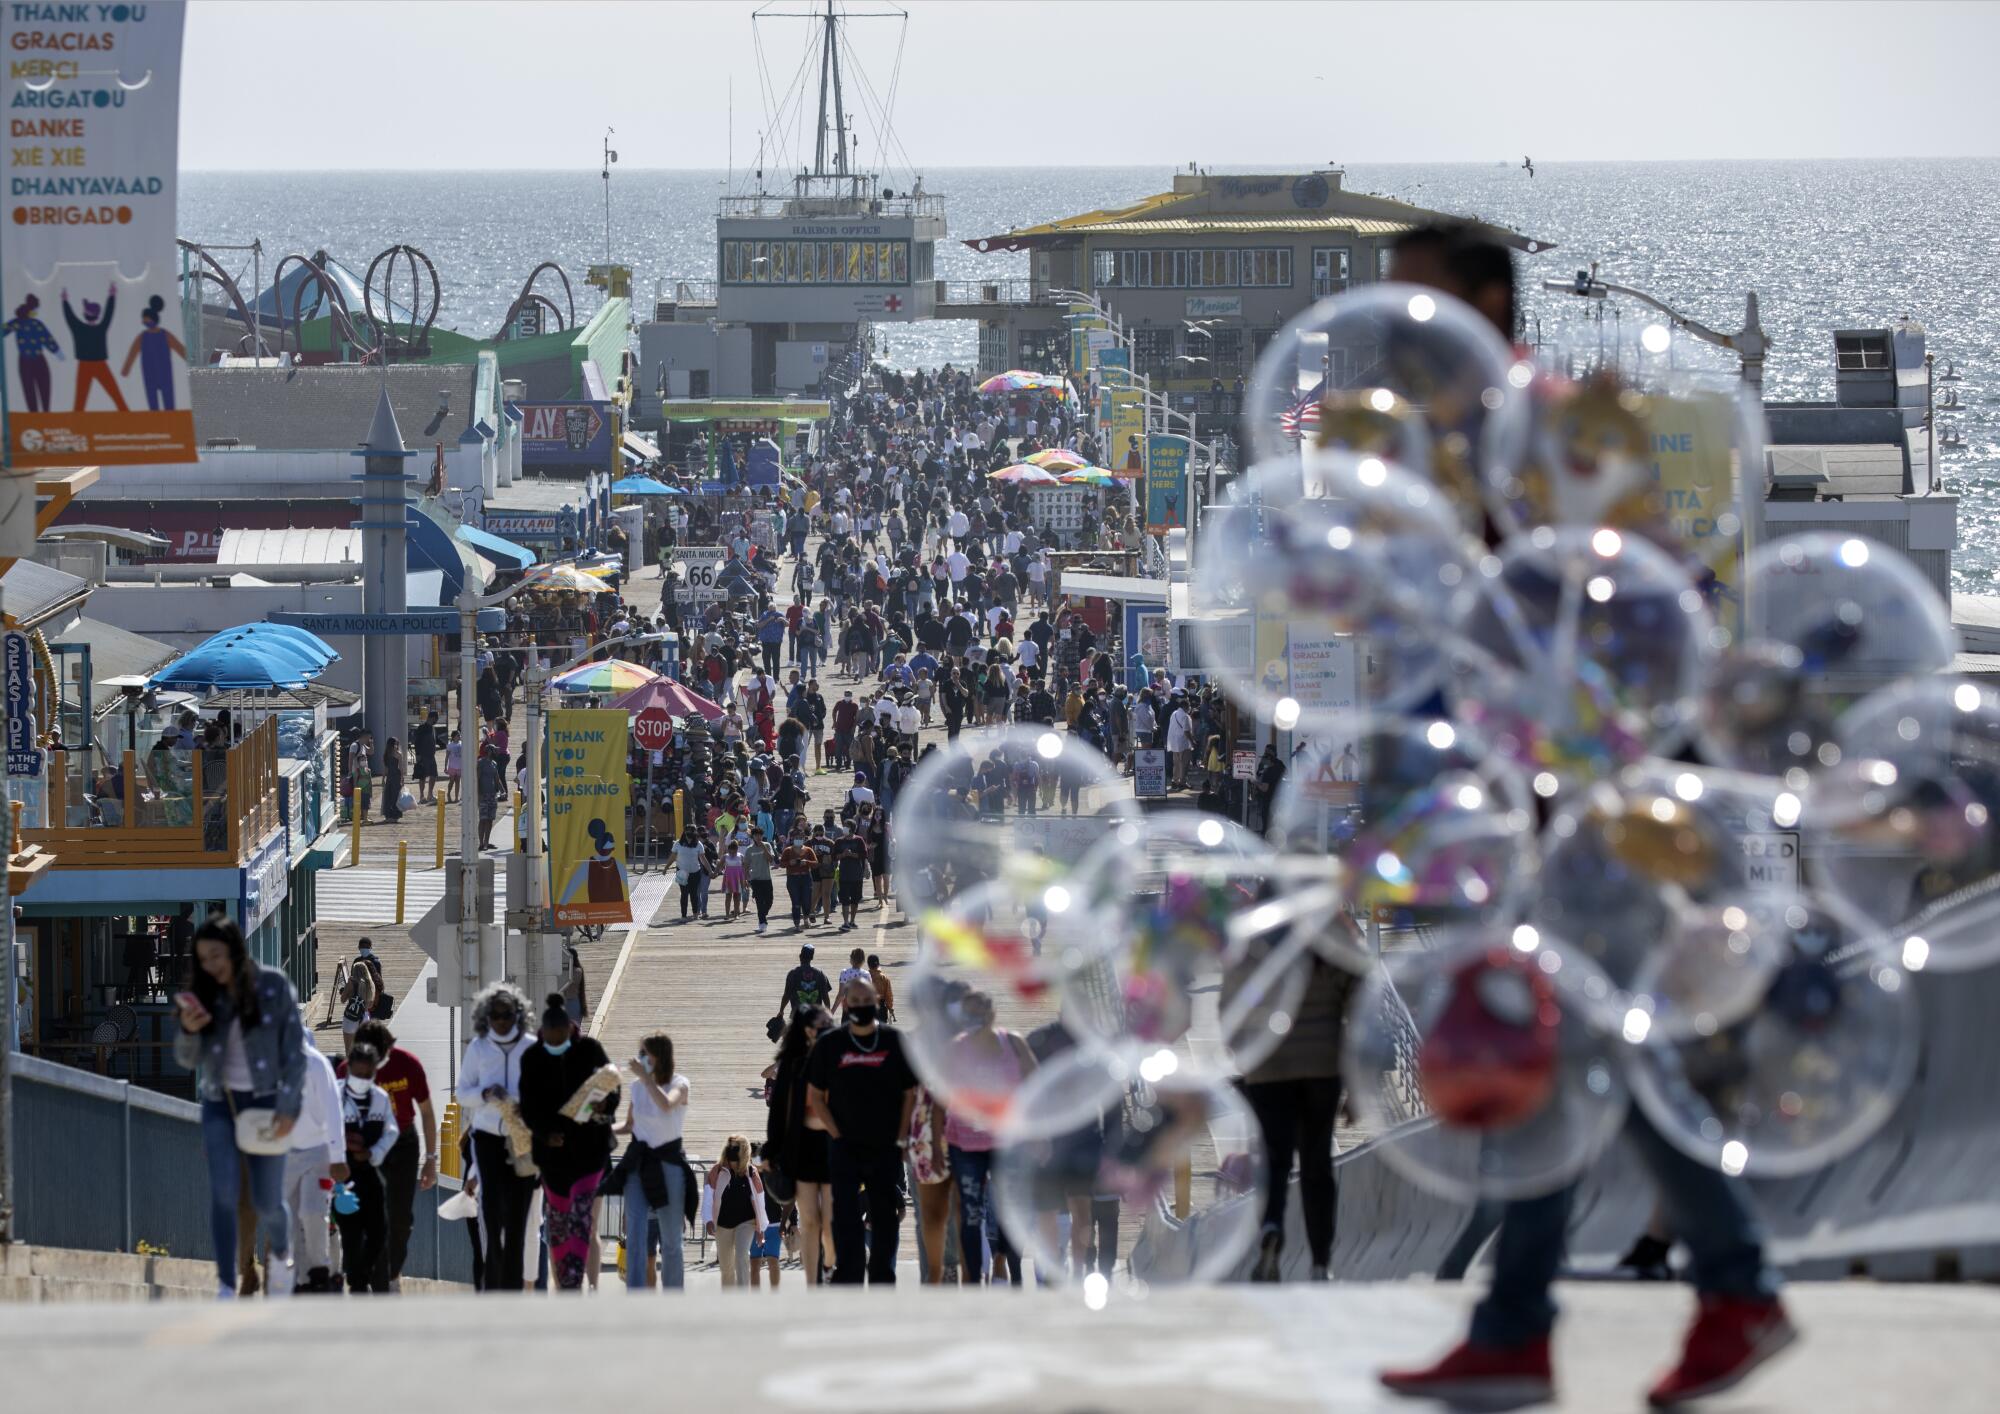 A balloon vendor, in the foreground on a pier crowded with people, is obscured by his balloons.